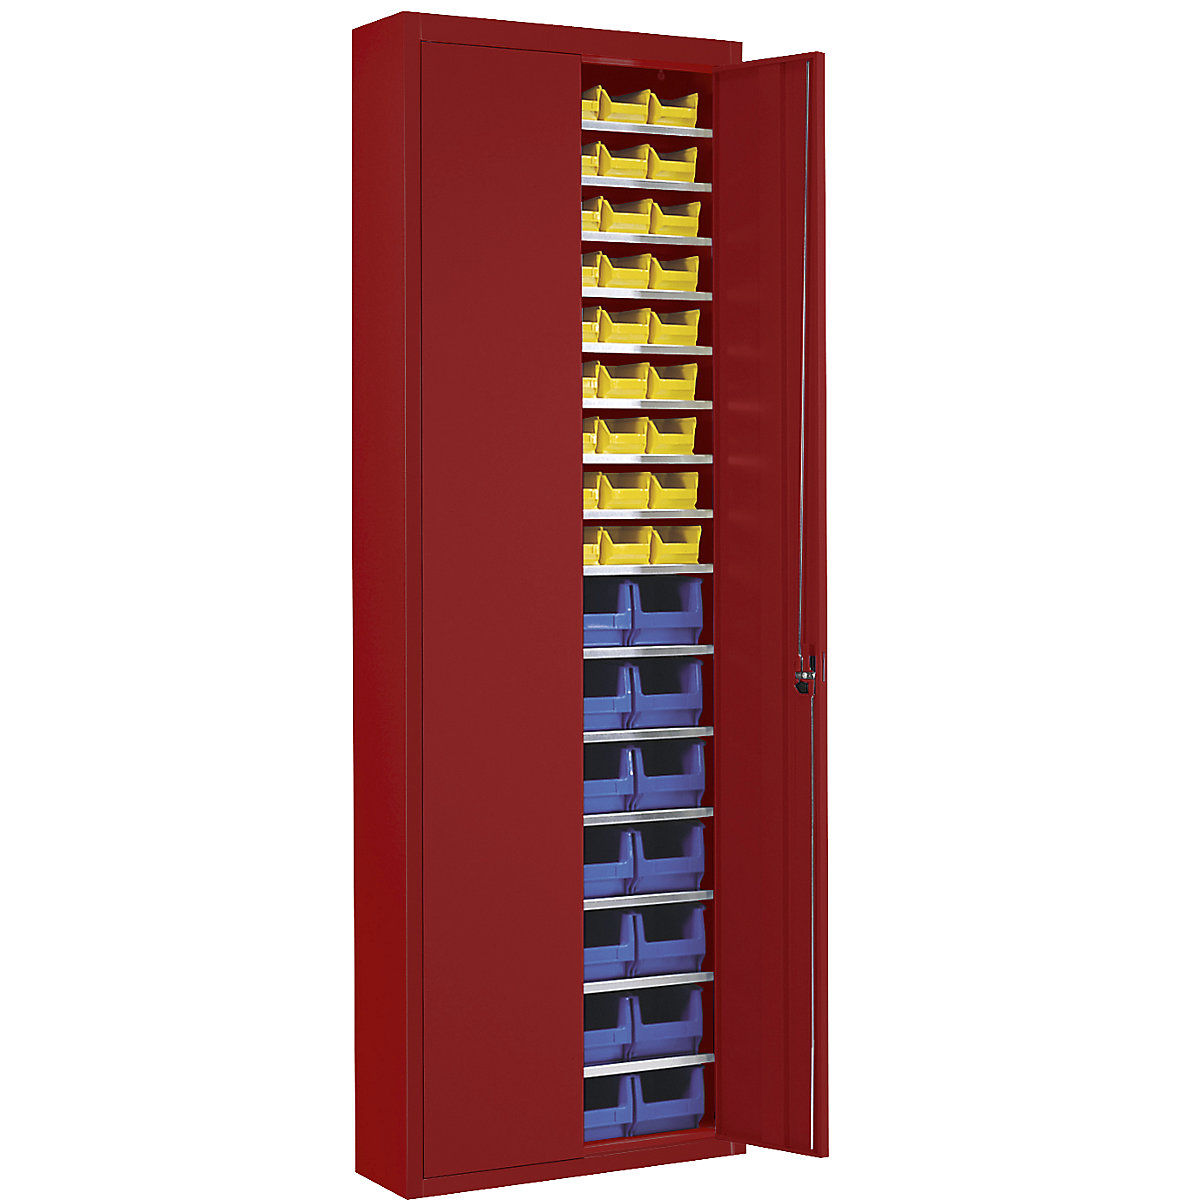 Storage cupboard with open fronted storage bins – mauser, HxWxD 2150 x 680 x 280 mm, single colour, red, 82 bins-8